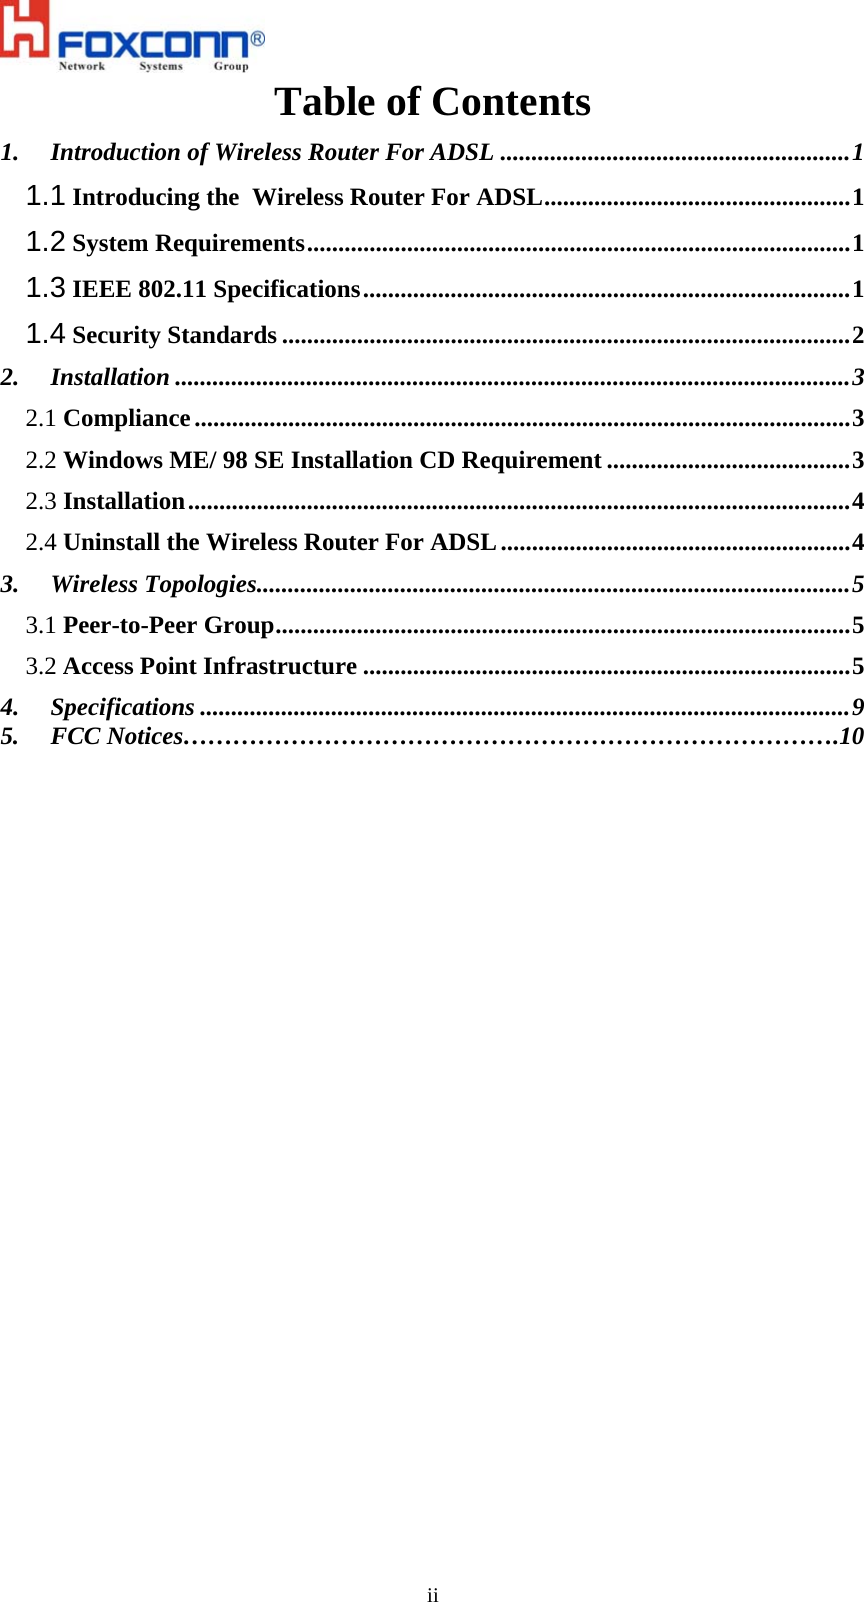   iiTable of Contents 1. Introduction of Wireless Router For ADSL ........................................................1 1.1 Introducing the  Wireless Router For ADSL.................................................1 1.2 System Requirements.......................................................................................1 1.3 IEEE 802.11 Specifications..............................................................................1 1.4 Security Standards ...........................................................................................2 2. Installation ............................................................................................................3 2.1 Compliance.........................................................................................................3 2.2 Windows ME/ 98 SE Installation CD Requirement .......................................3 2.3 Installation..........................................................................................................4 2.4 Uninstall the Wireless Router For ADSL........................................................4 3. Wireless Topologies...............................................................................................5 3.1 Peer-to-Peer Group............................................................................................5 3.2 Access Point Infrastructure ..............................................................................5 4. Specifications ........................................................................................................9 5.     FCC Notices…………………………………………………………………….10  